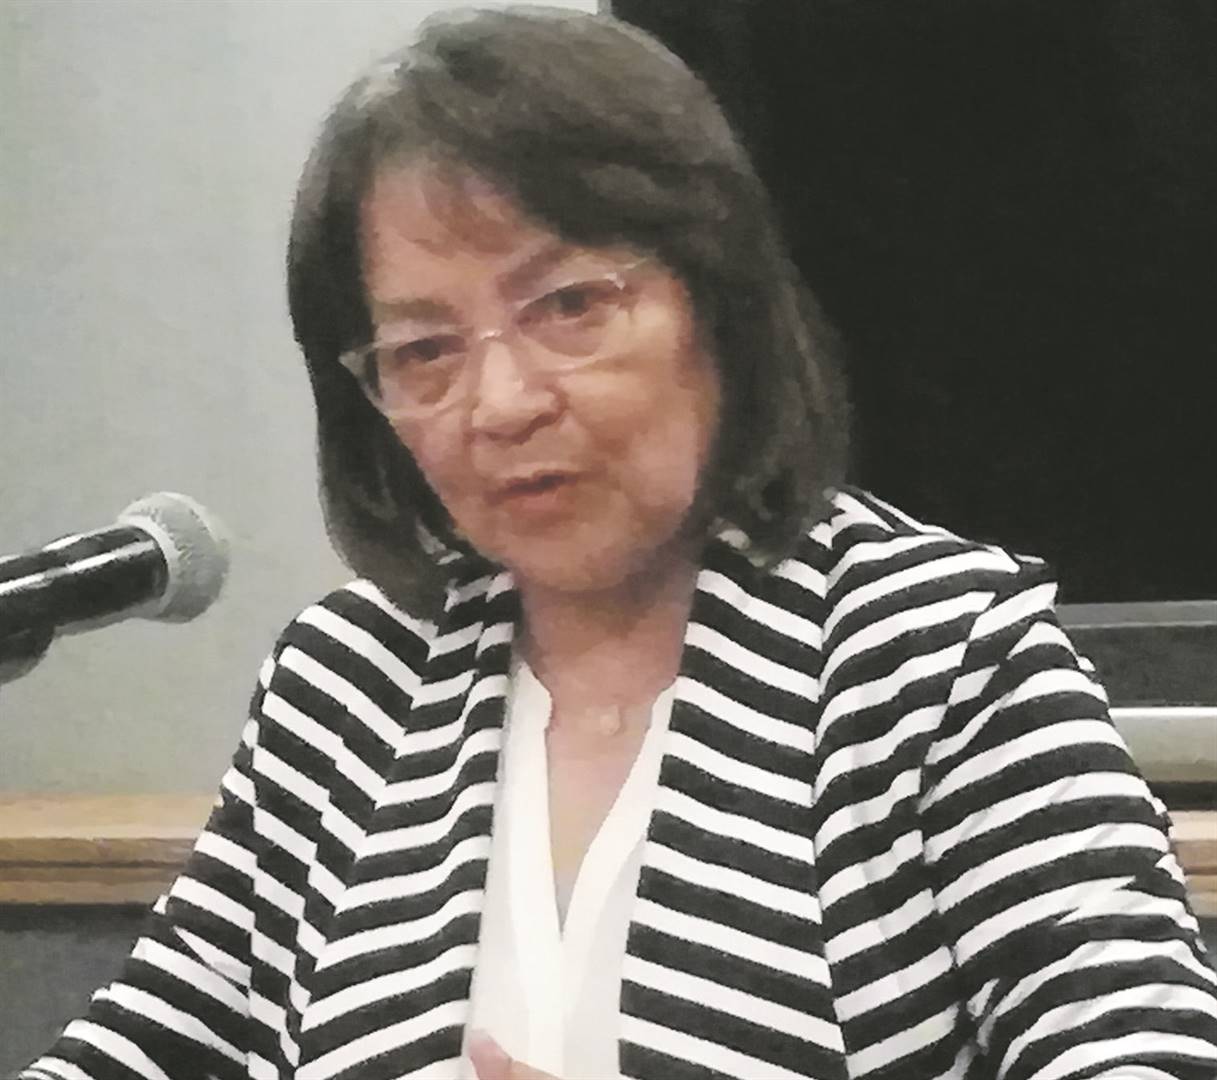 Minister of public works and infrastructure Patricia de Lille